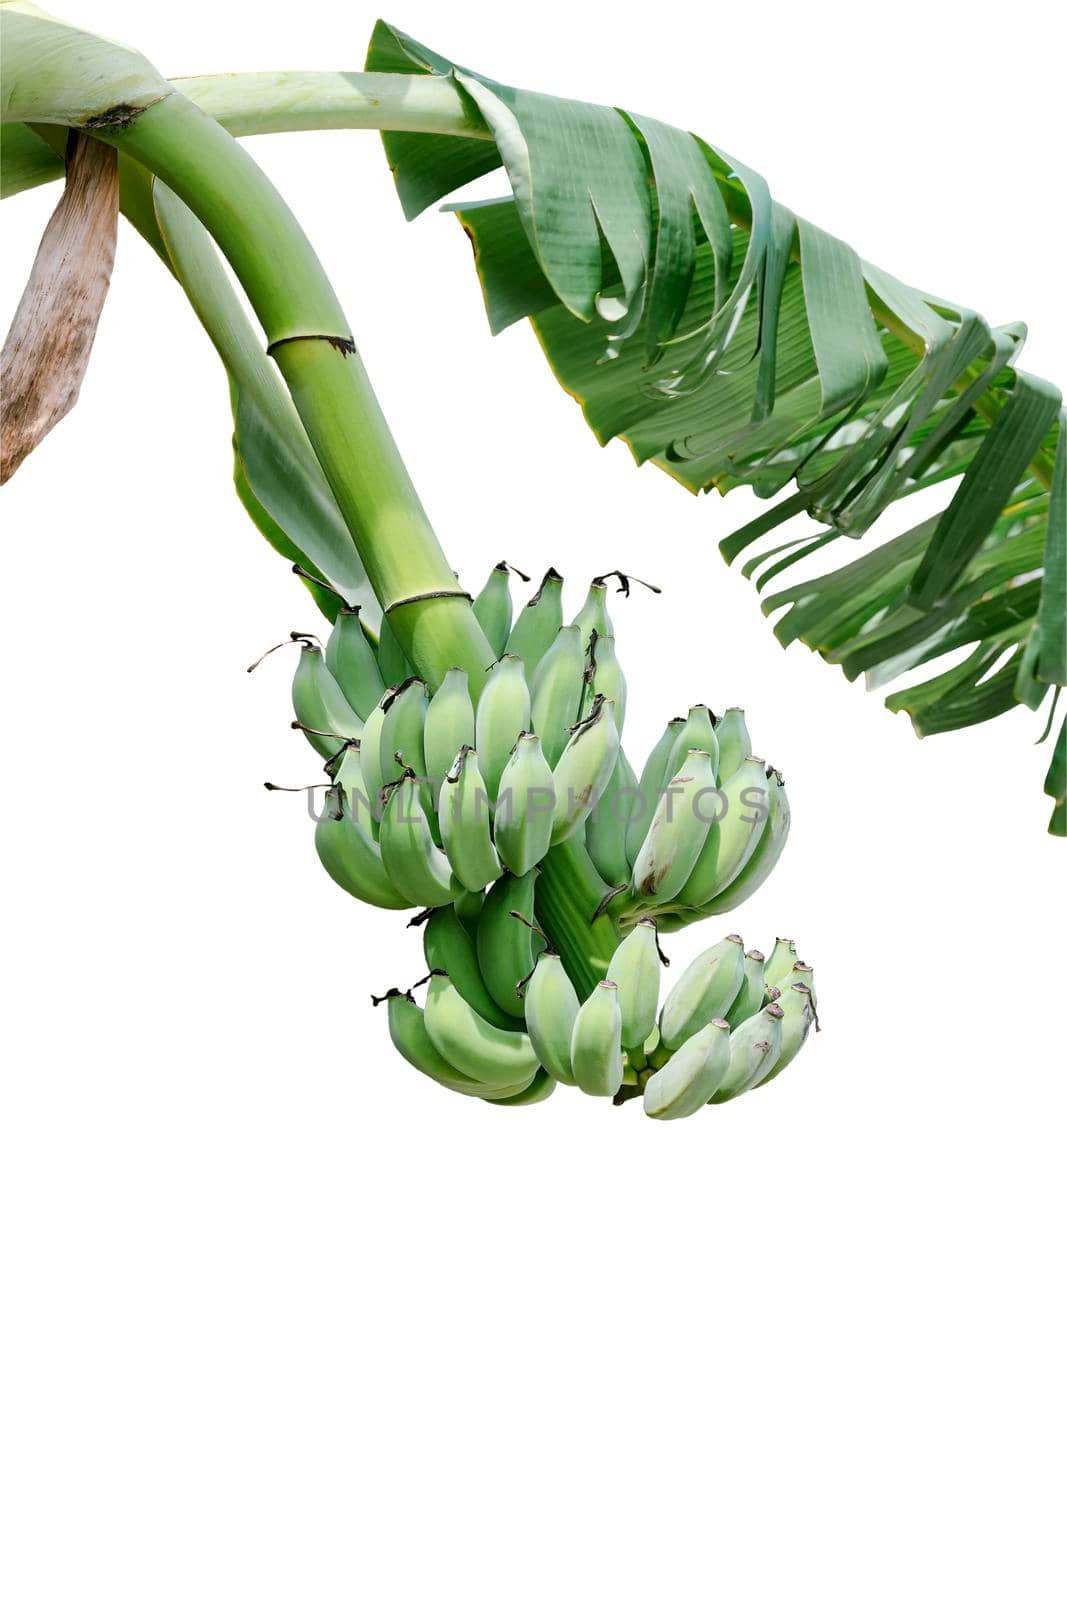 Group of green unripe bananas that are gathered on the same branch on white background. by wattanaphob